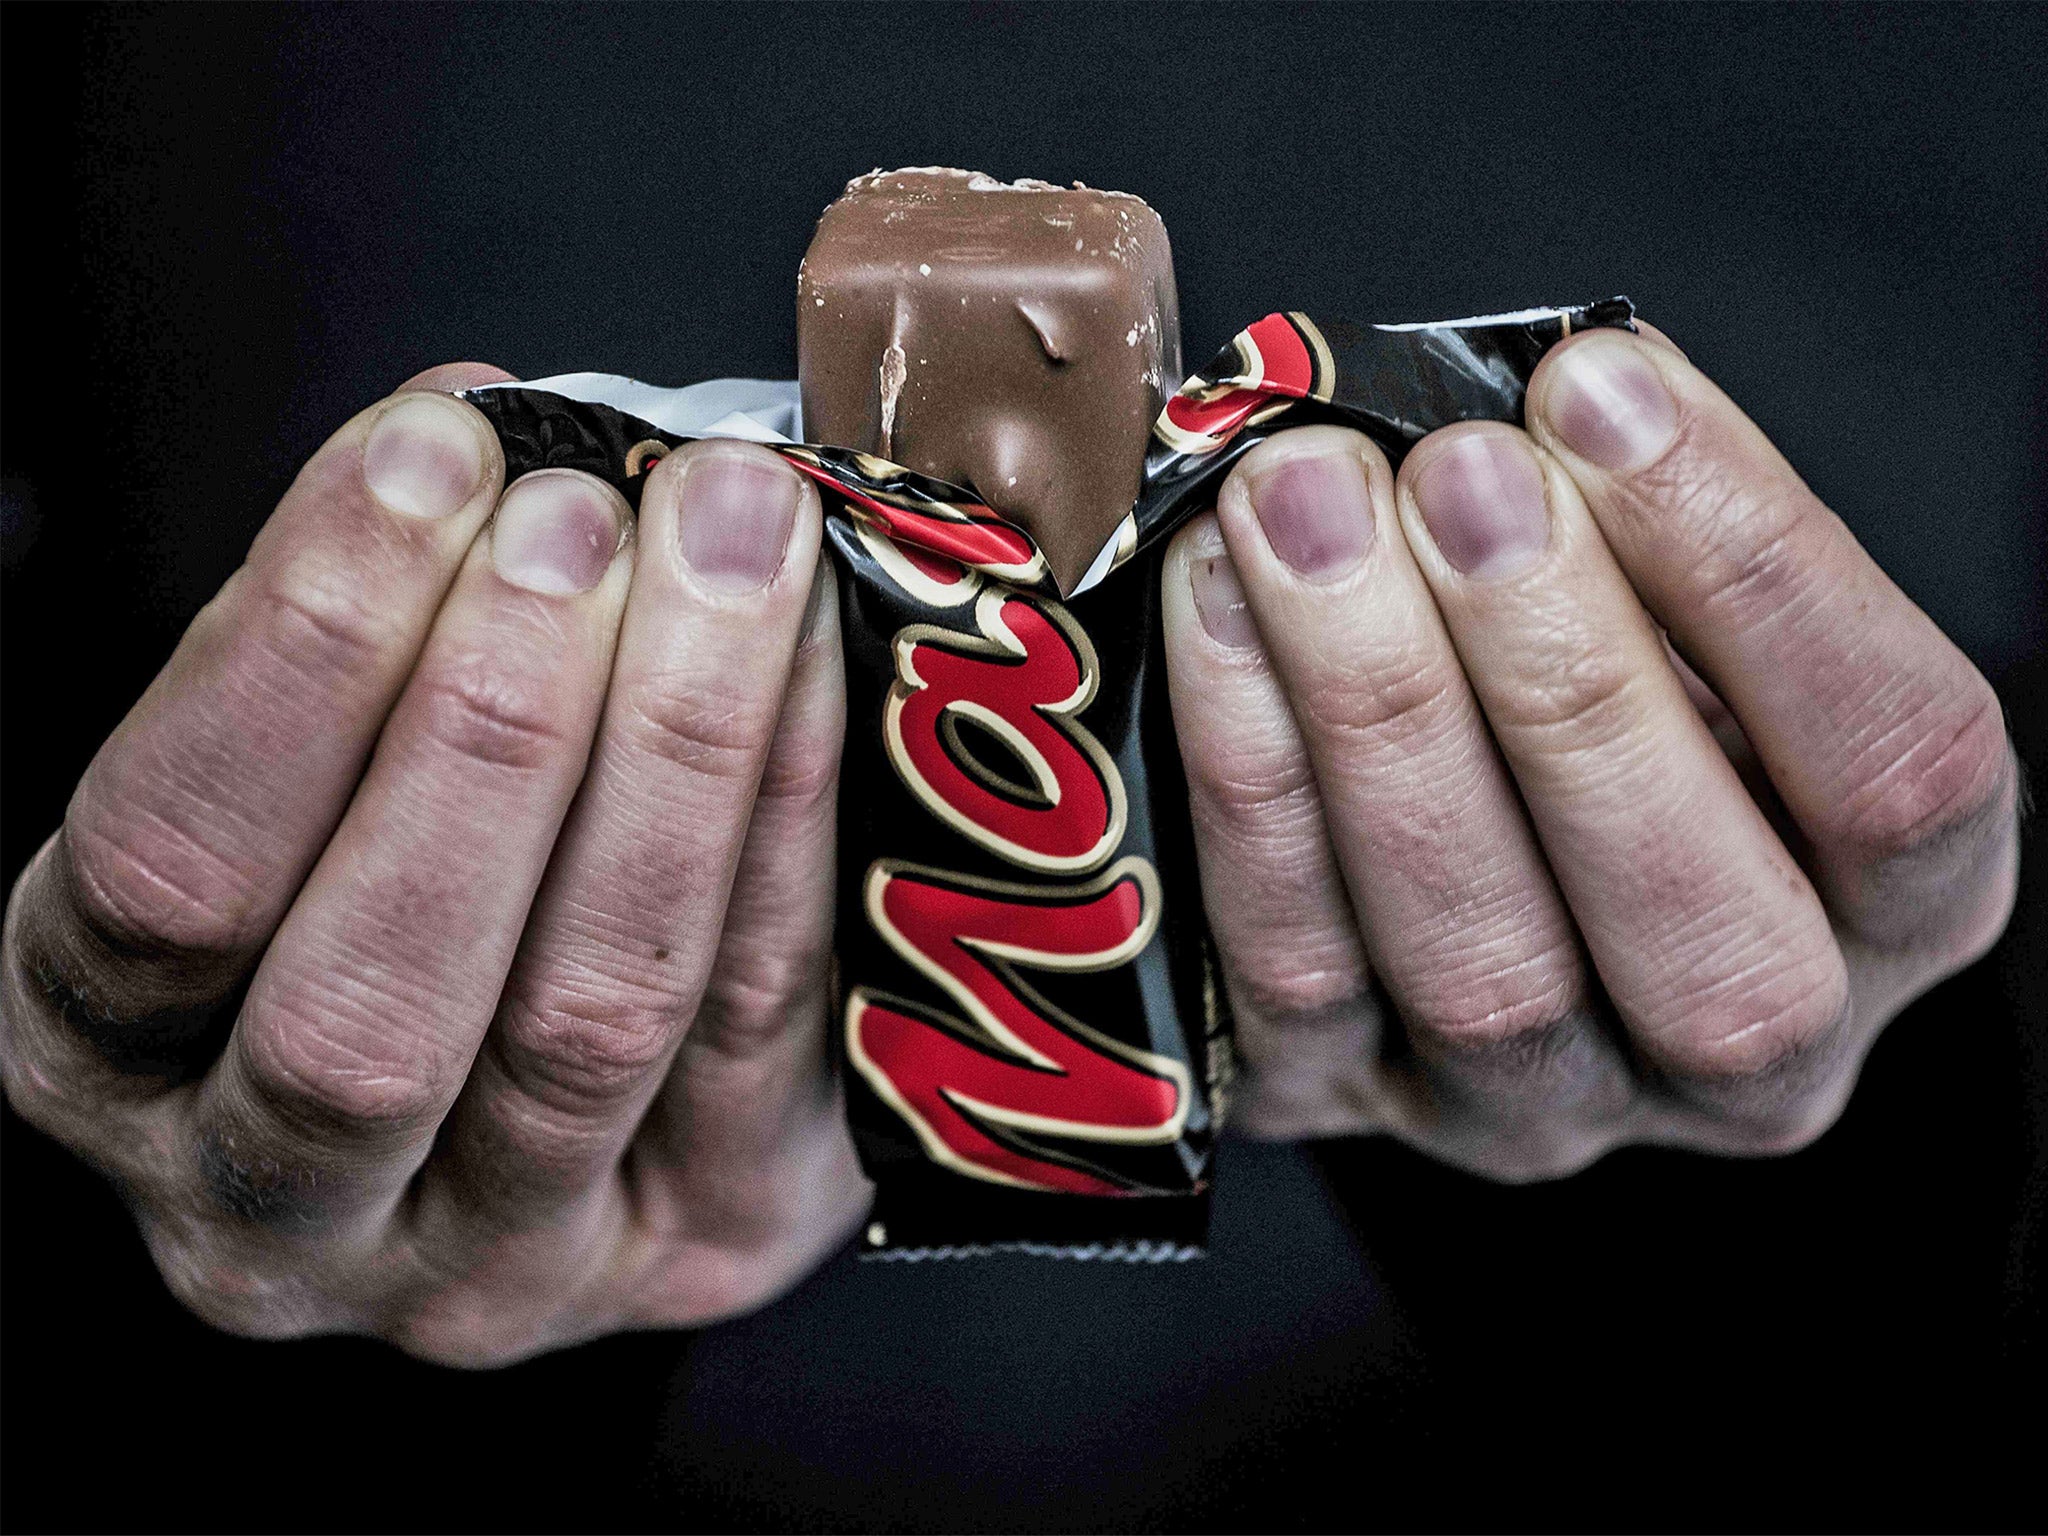 Crunch time: bits of plastic have been found in certain types of Mars chocolate bars